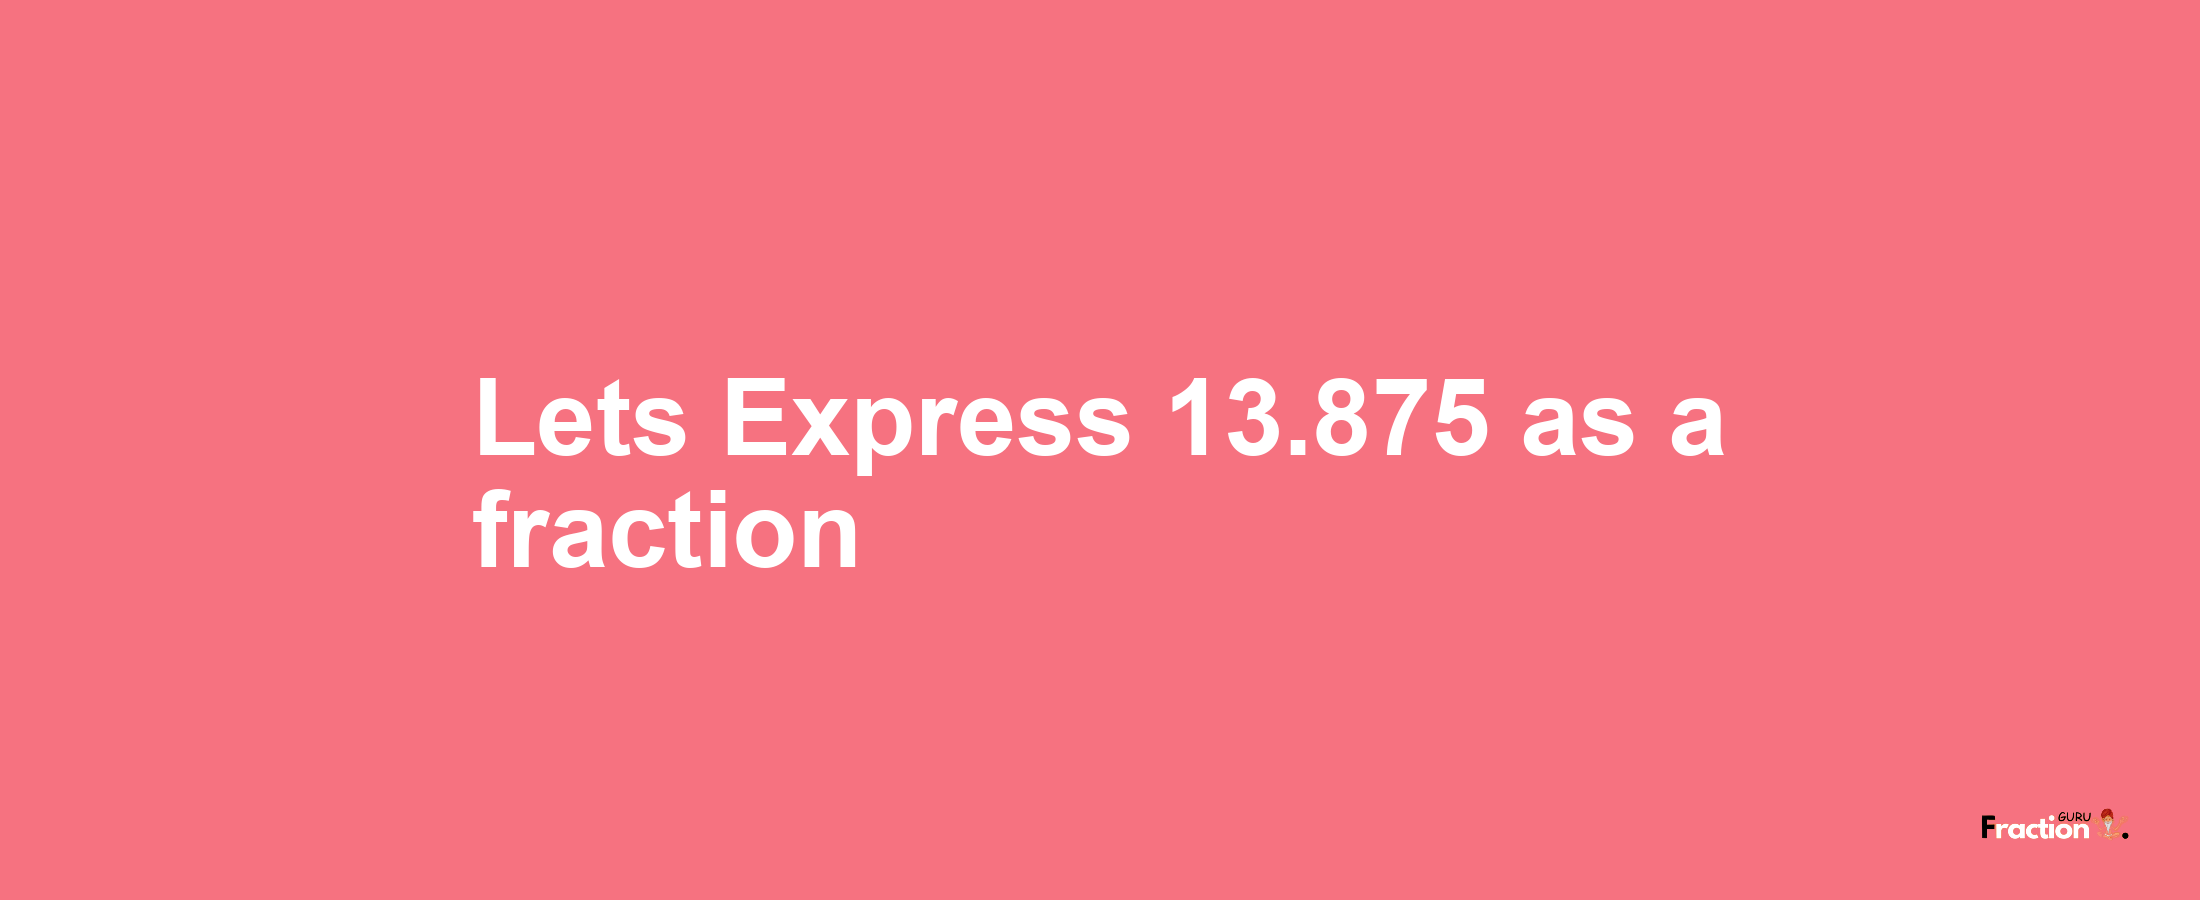 Lets Express 13.875 as afraction